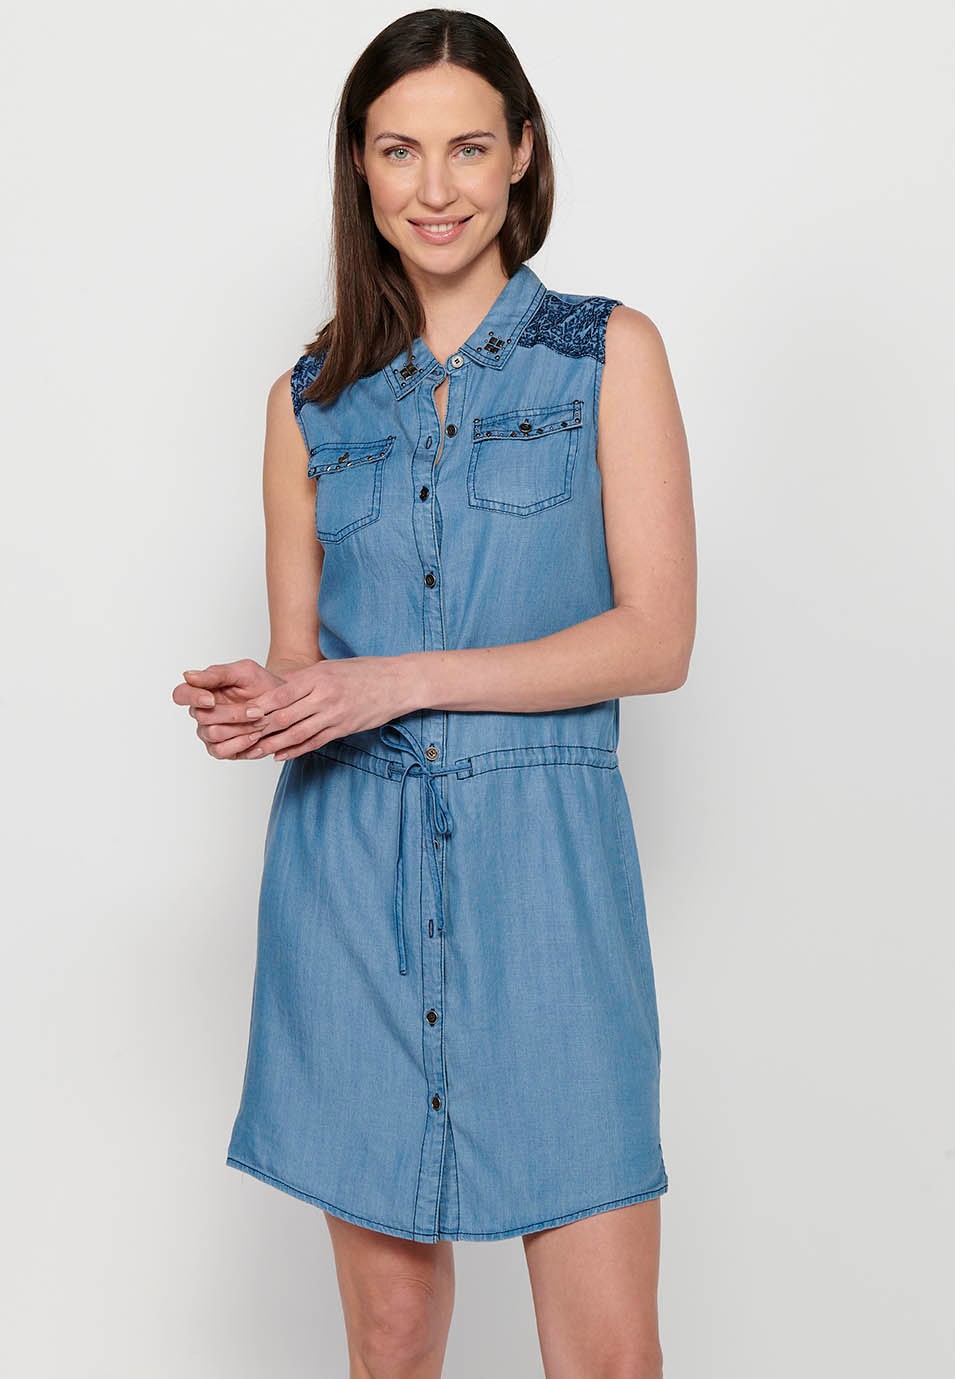 Sleeveless midi dress with front closure with buttons and embroidered details, tight at the waist in Blue for Women 7